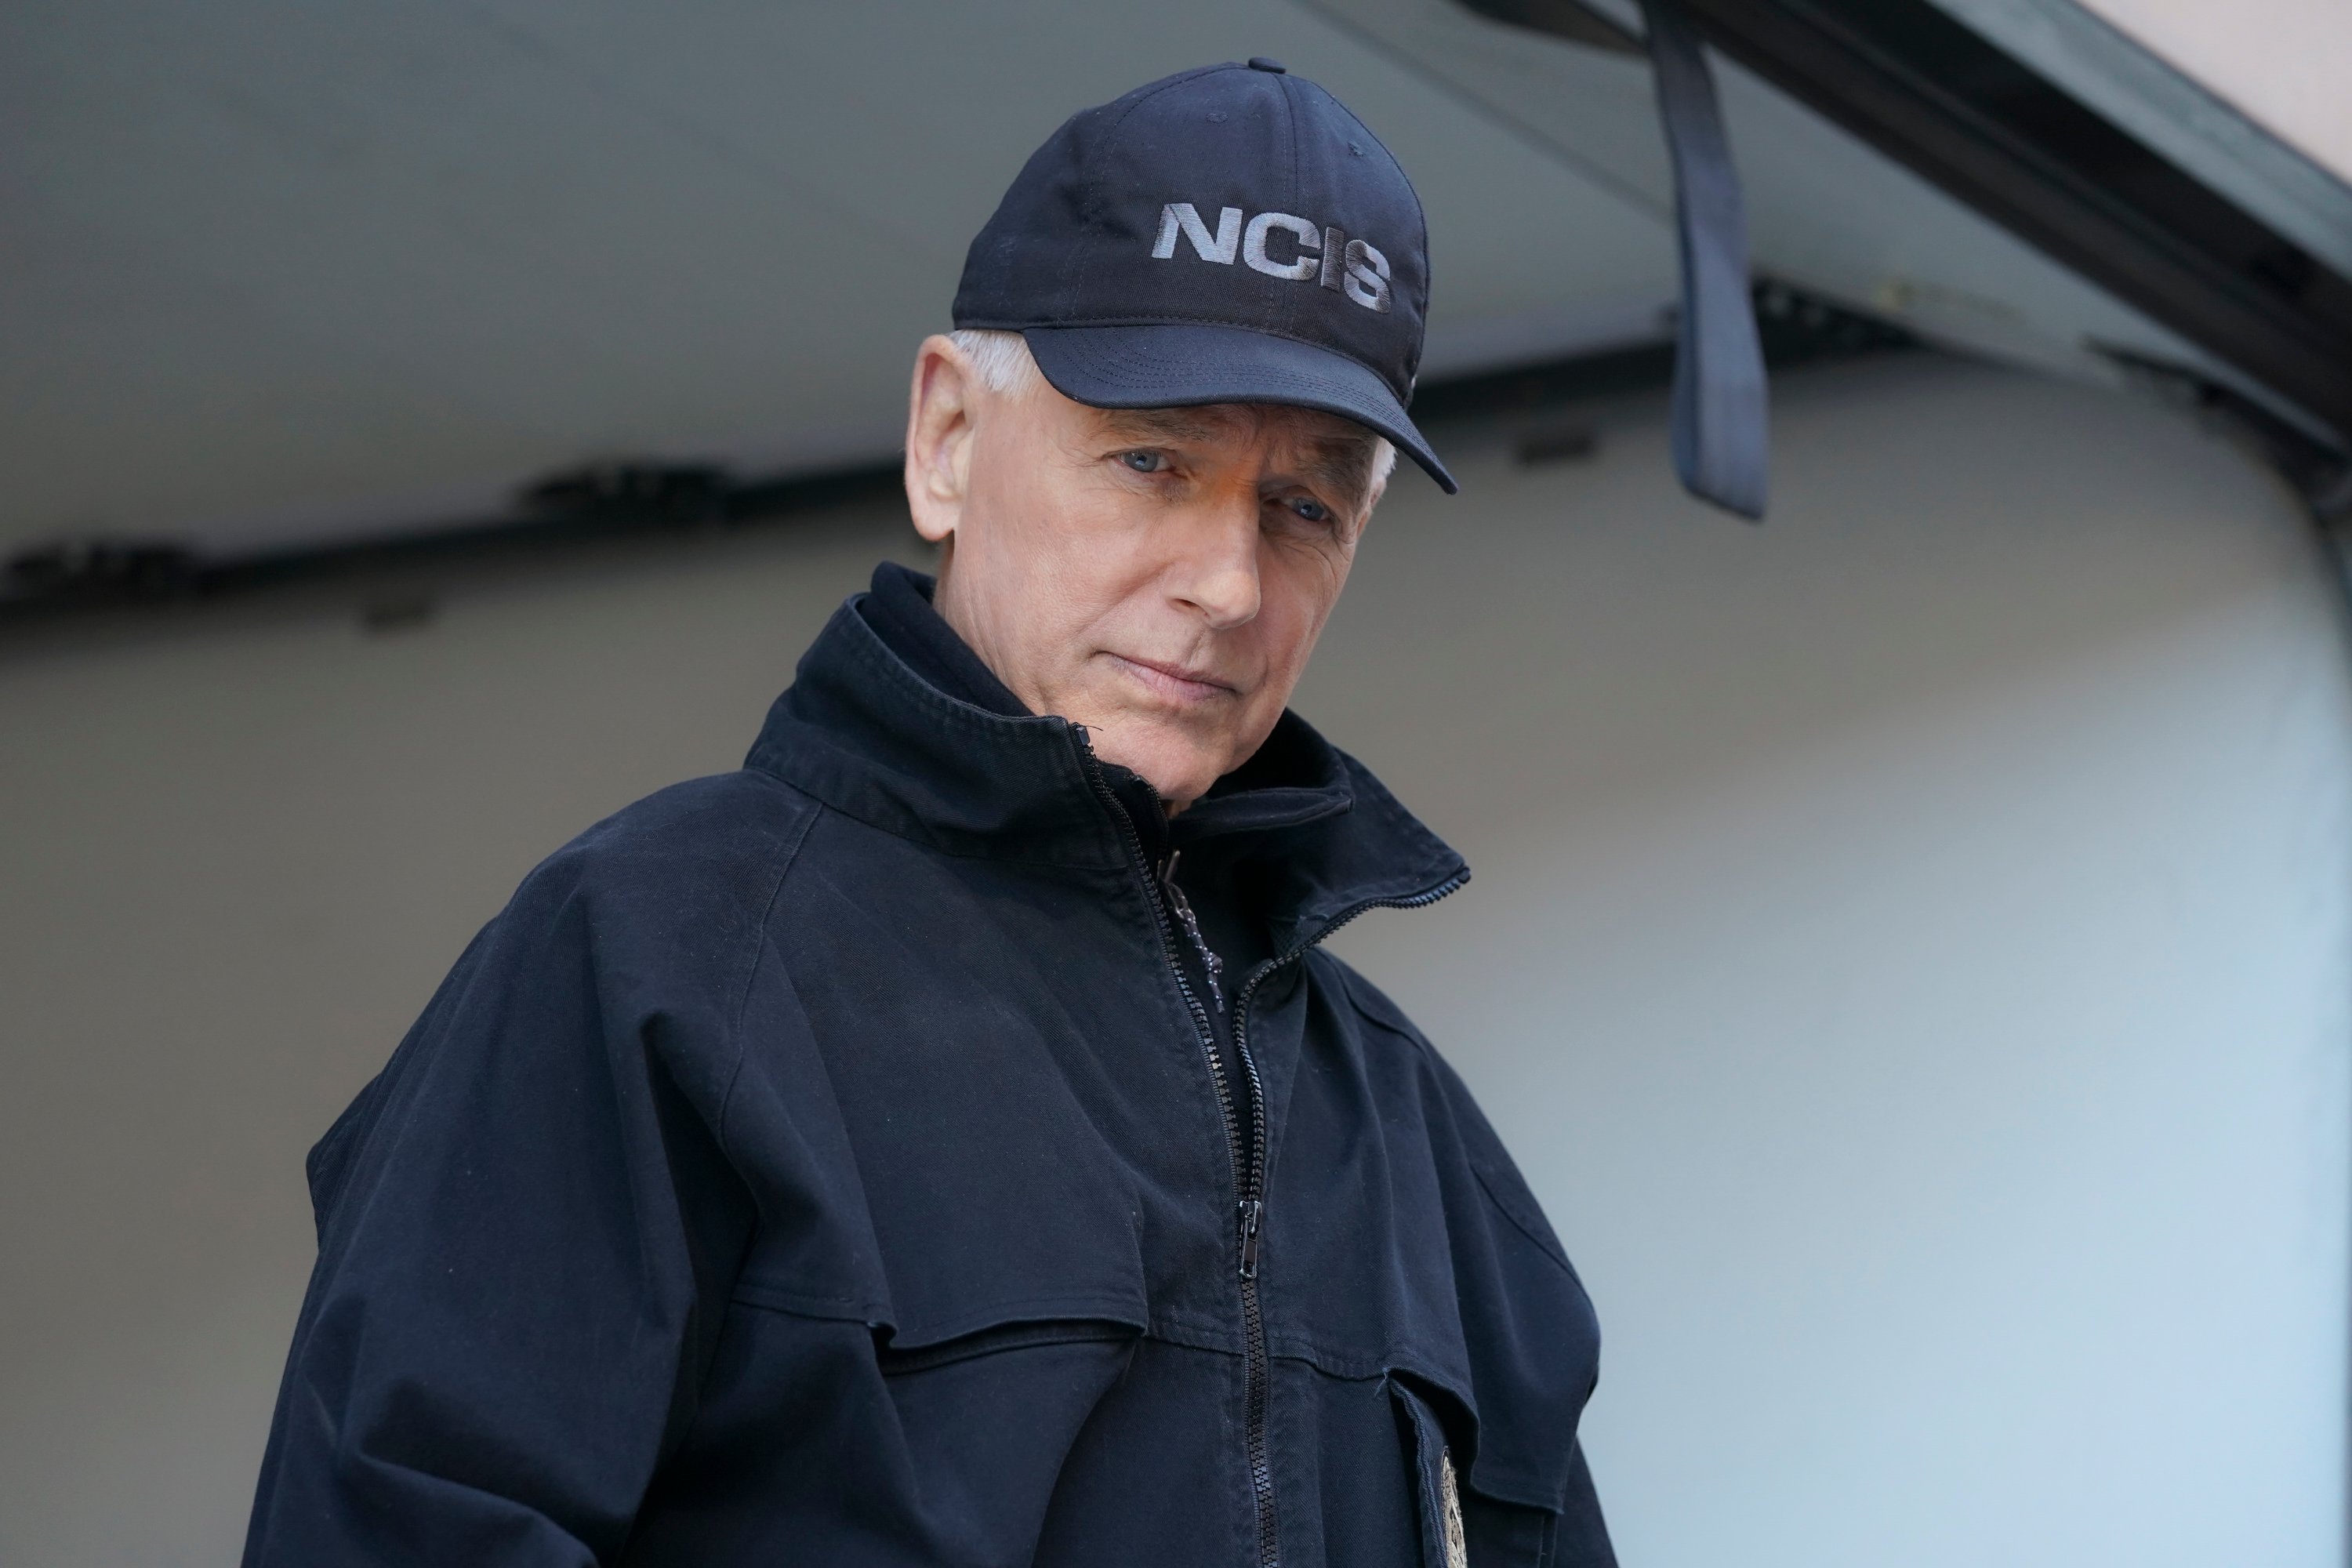 Mark Harmon wears an NCIS hat during a scene from 'NCIS'